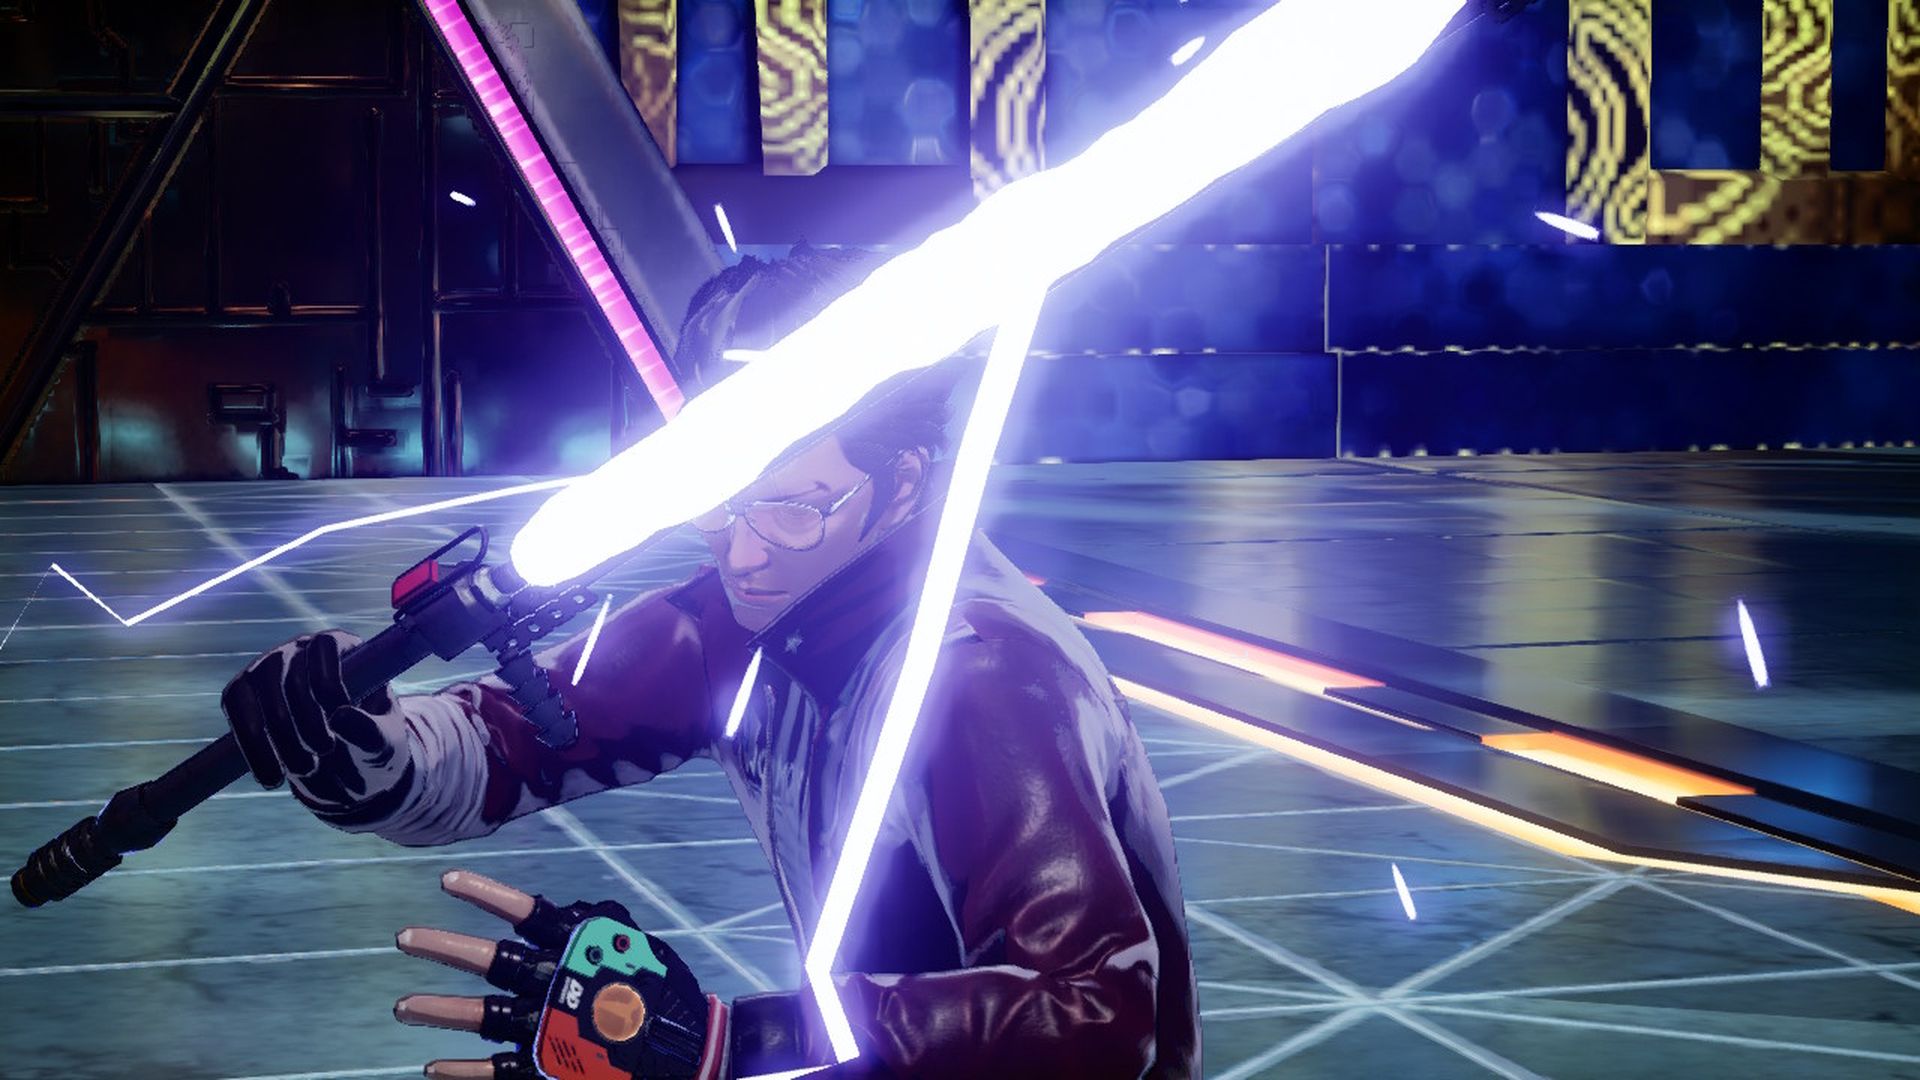 Screenshot of a video game character: a man in sunglasses holding a lightsaber-like weapon